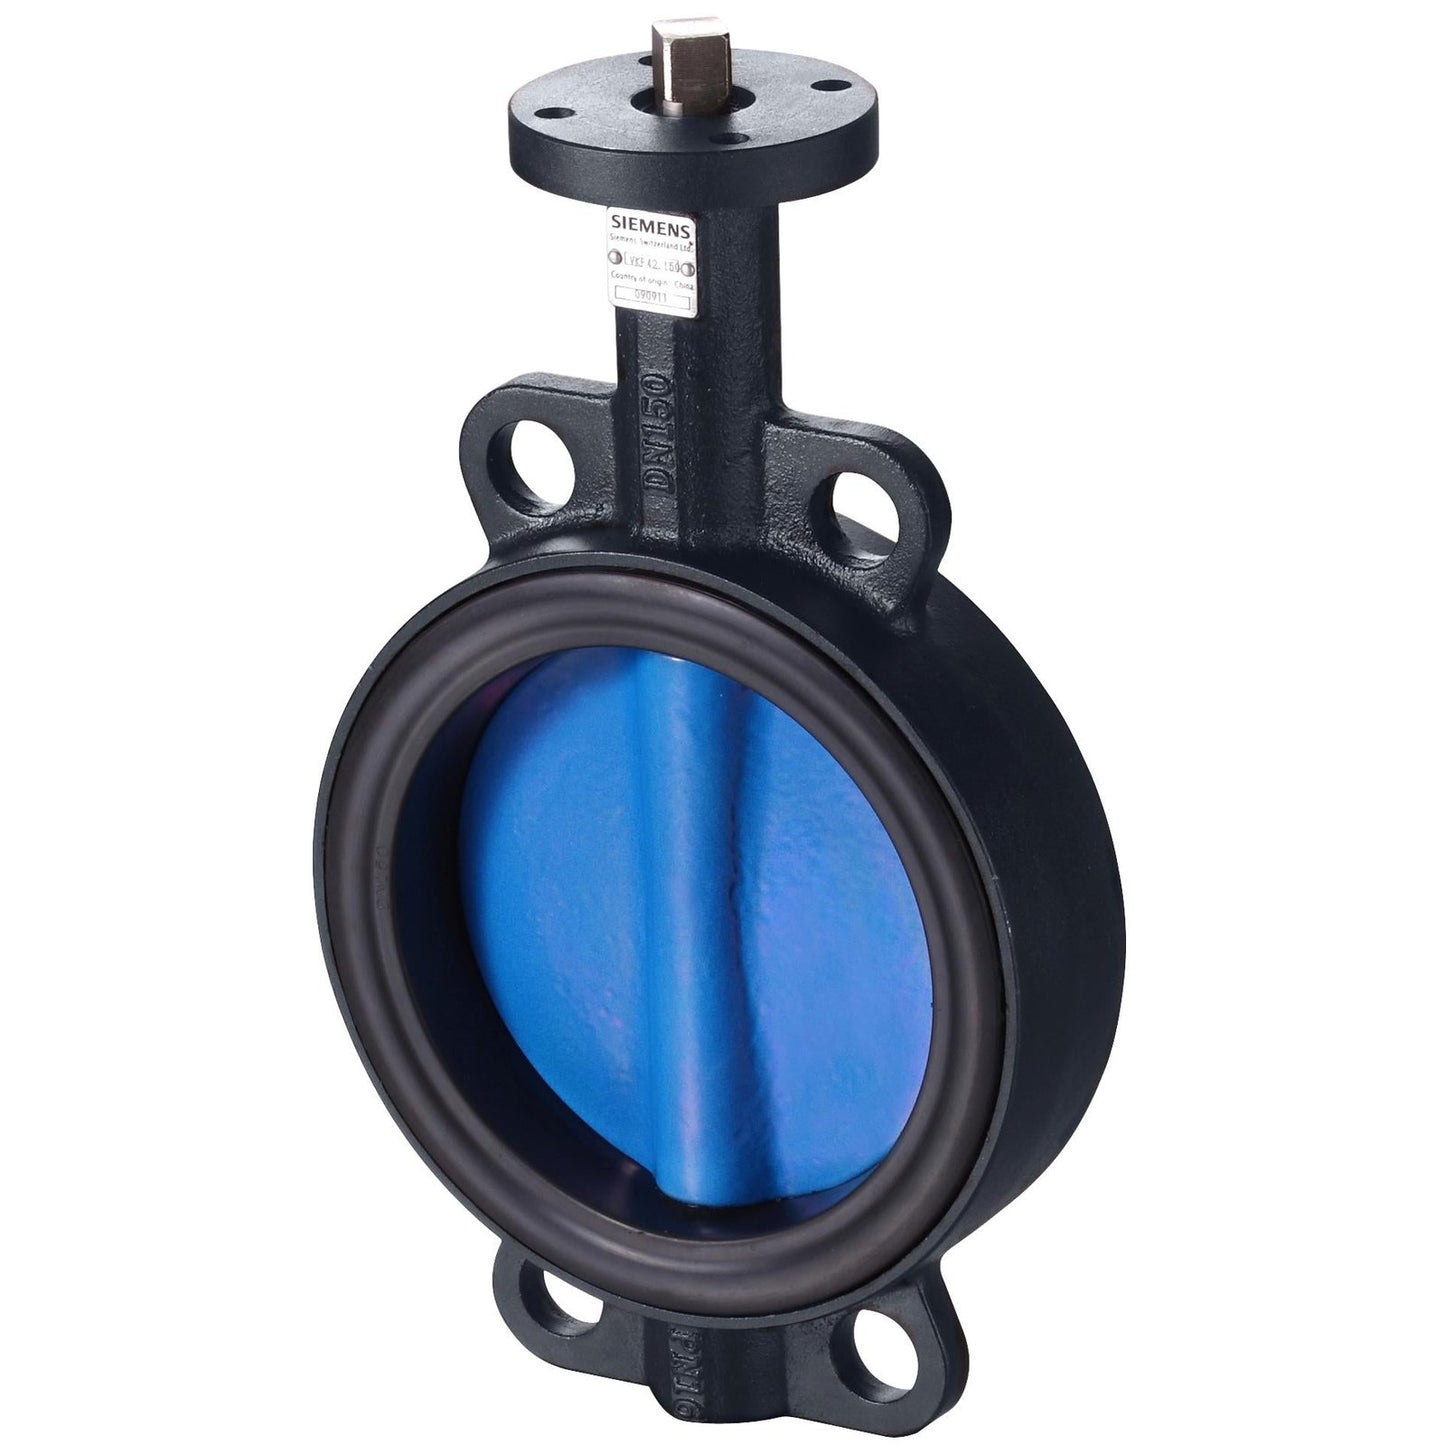 VKF42.350 Butterfly valves PN16 for flanged connections, with tight shutoff